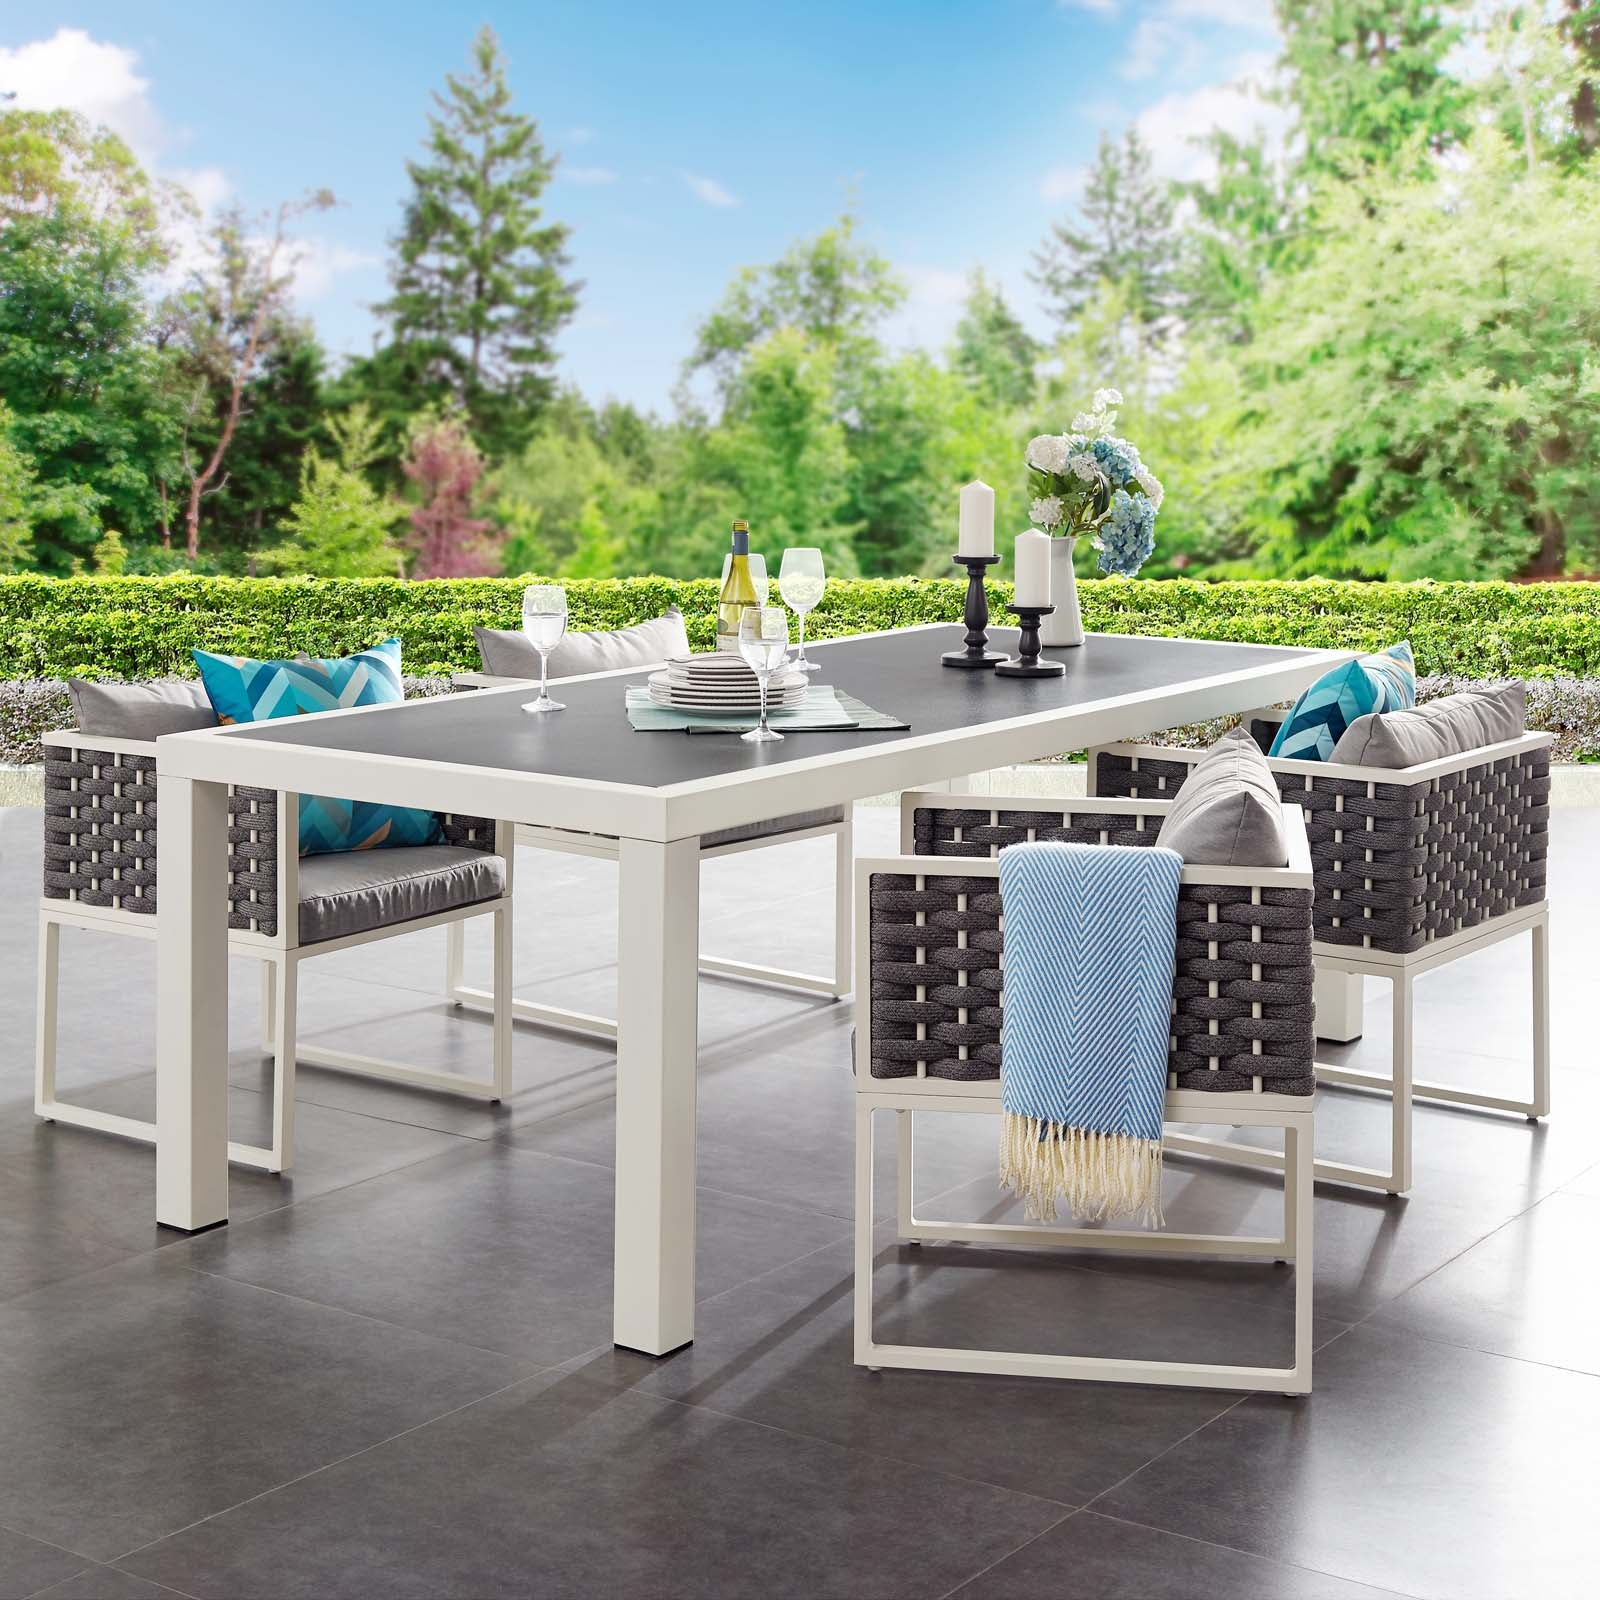 Stance 90.5" Outdoor Patio Aluminum Dining Table - East Shore Modern Home Furnishings